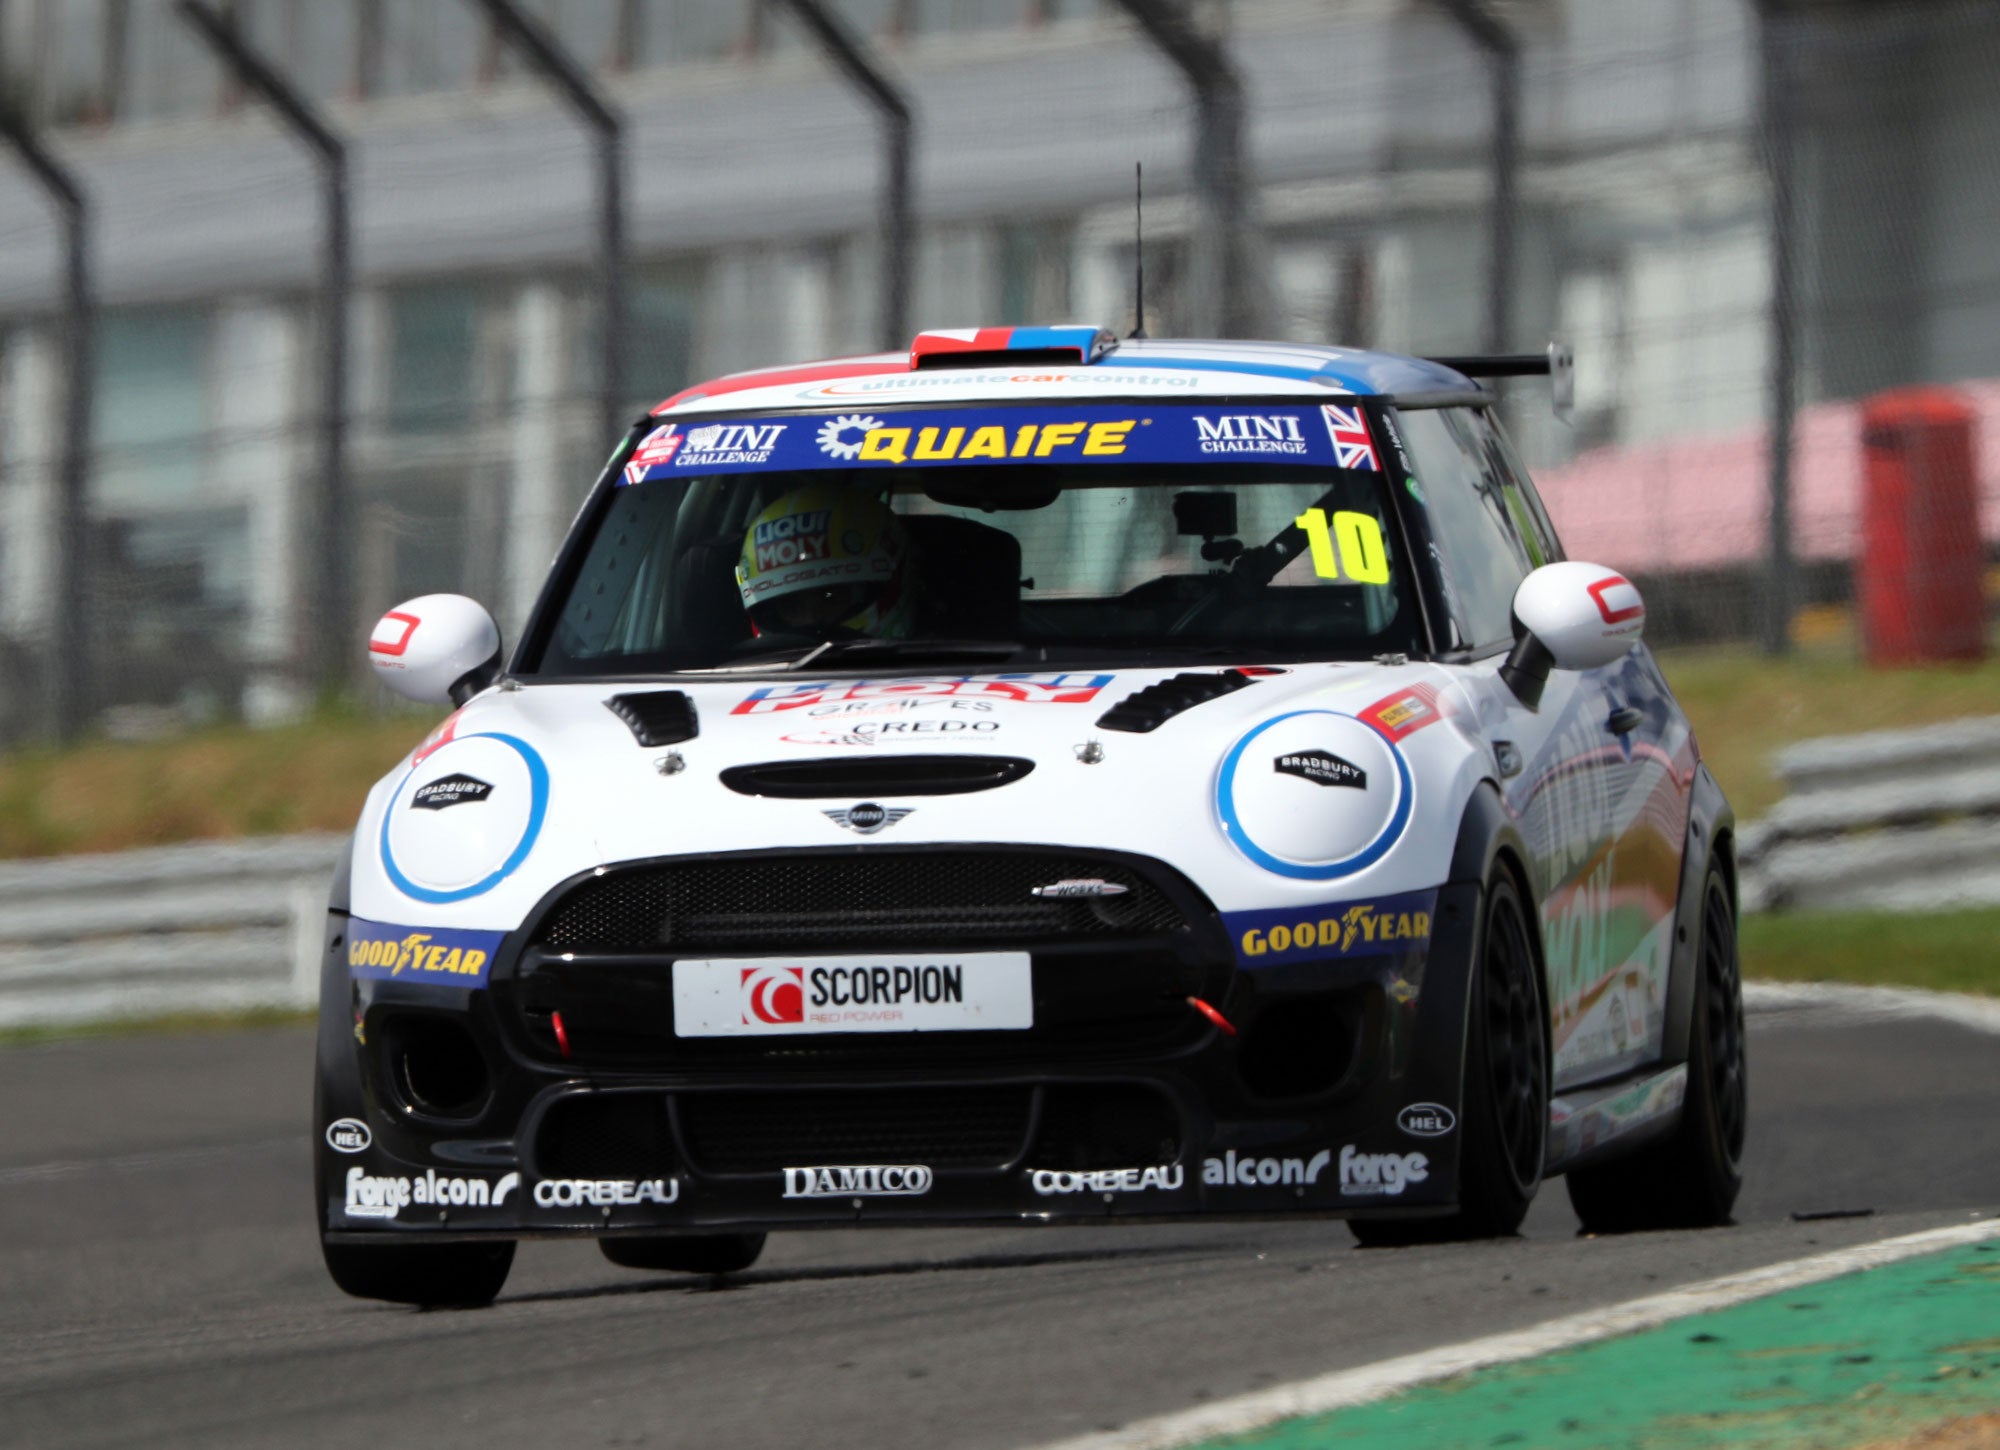 Bradley Gravett son of BTCC British Touring Car Champion Robb Gravett in the MINI Challenge JCW Series at Brands Hatch Indy in 2021 Test Paddock Hill 2 Graves Motorsport Cooper Racing Driver LIQUI MOLY LM Performance Thinking it Better